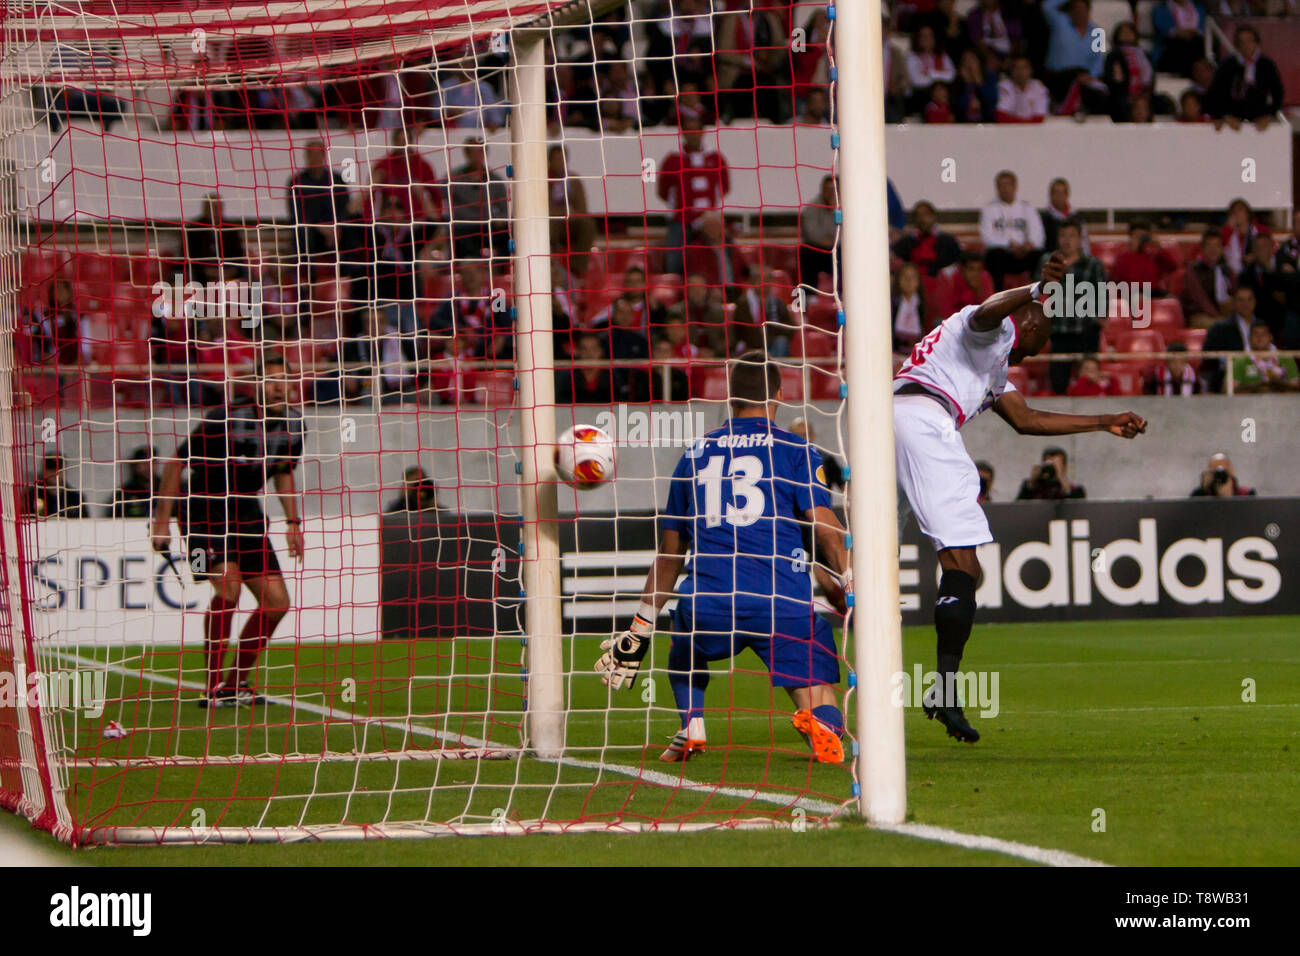 Stephane M'Bia, player of Sevilla FC, scores for 1-0 during the match of Europa League (Semifinal 1st leg) between Sevilla FC and Valencia CF at the Ramon Sanchez Pizjuan Stadium on April 24, 2014 in Seville, Spain Stock Photo